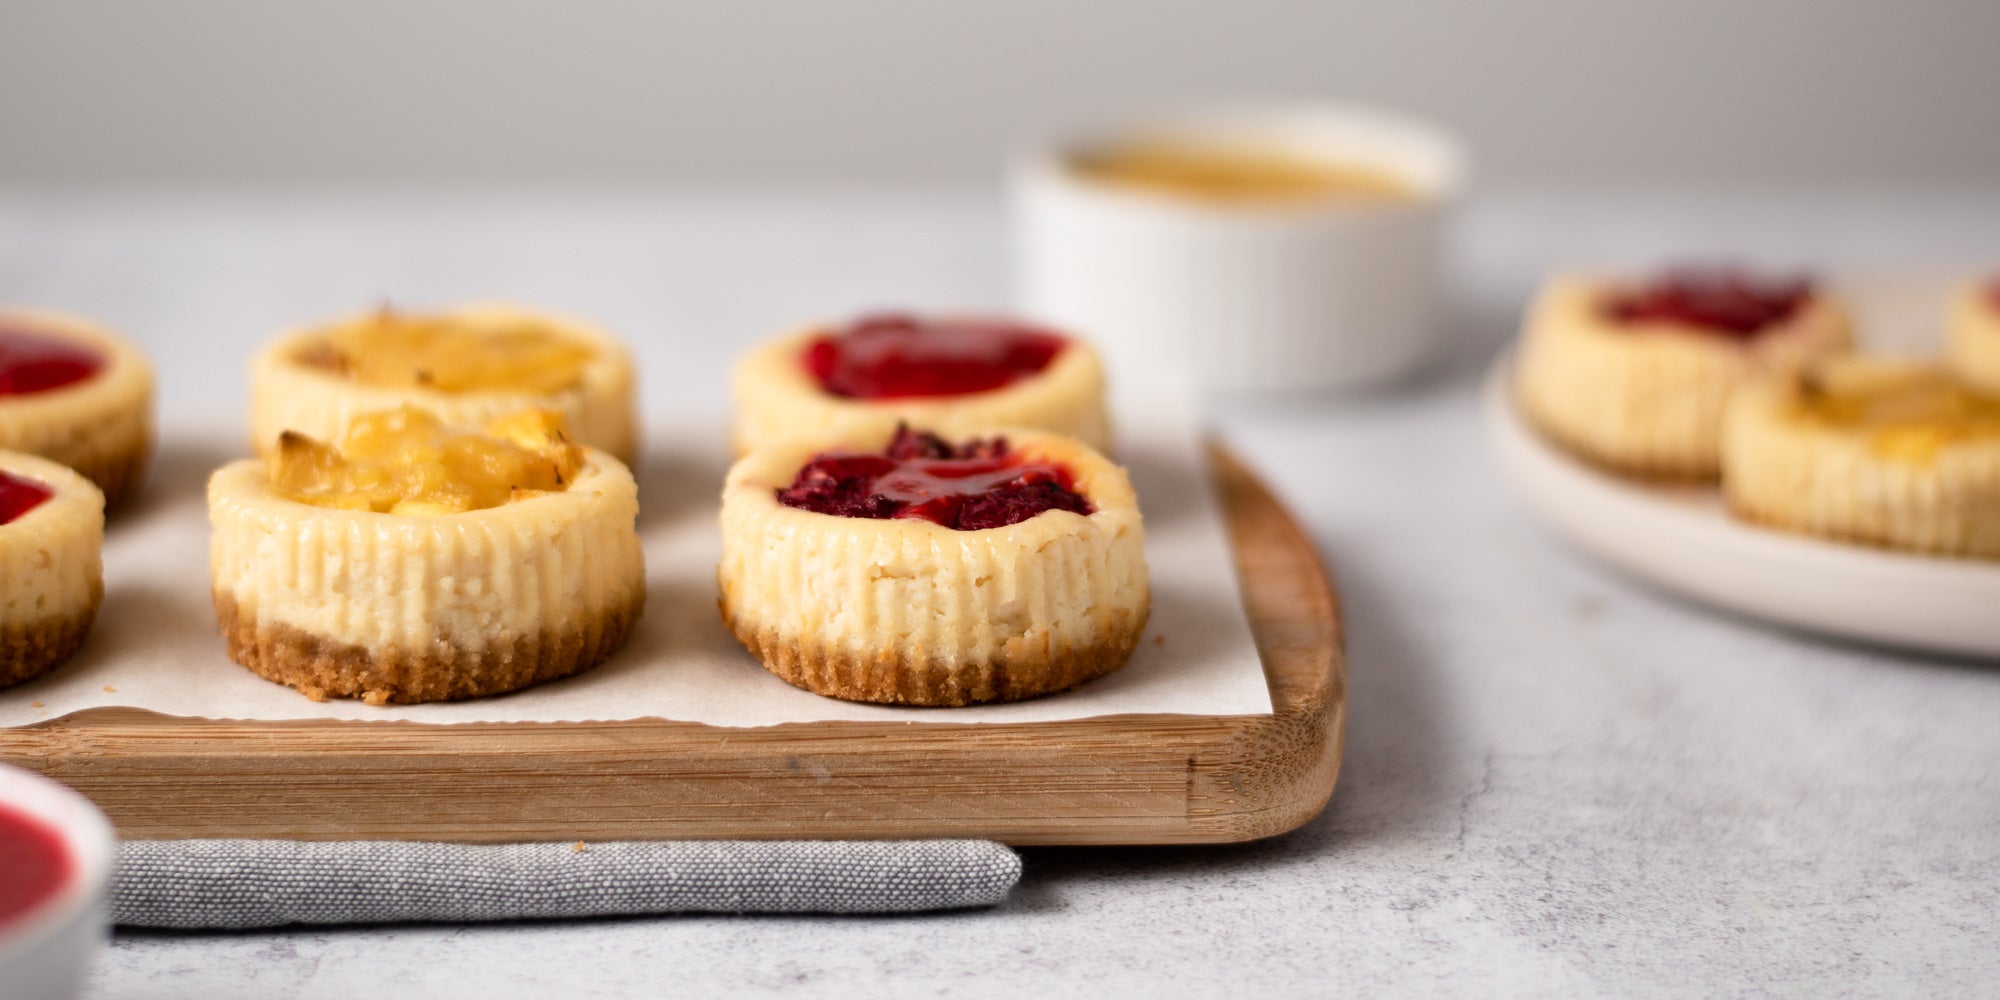 Mini cheesecakes topped with fruit on a wooden board